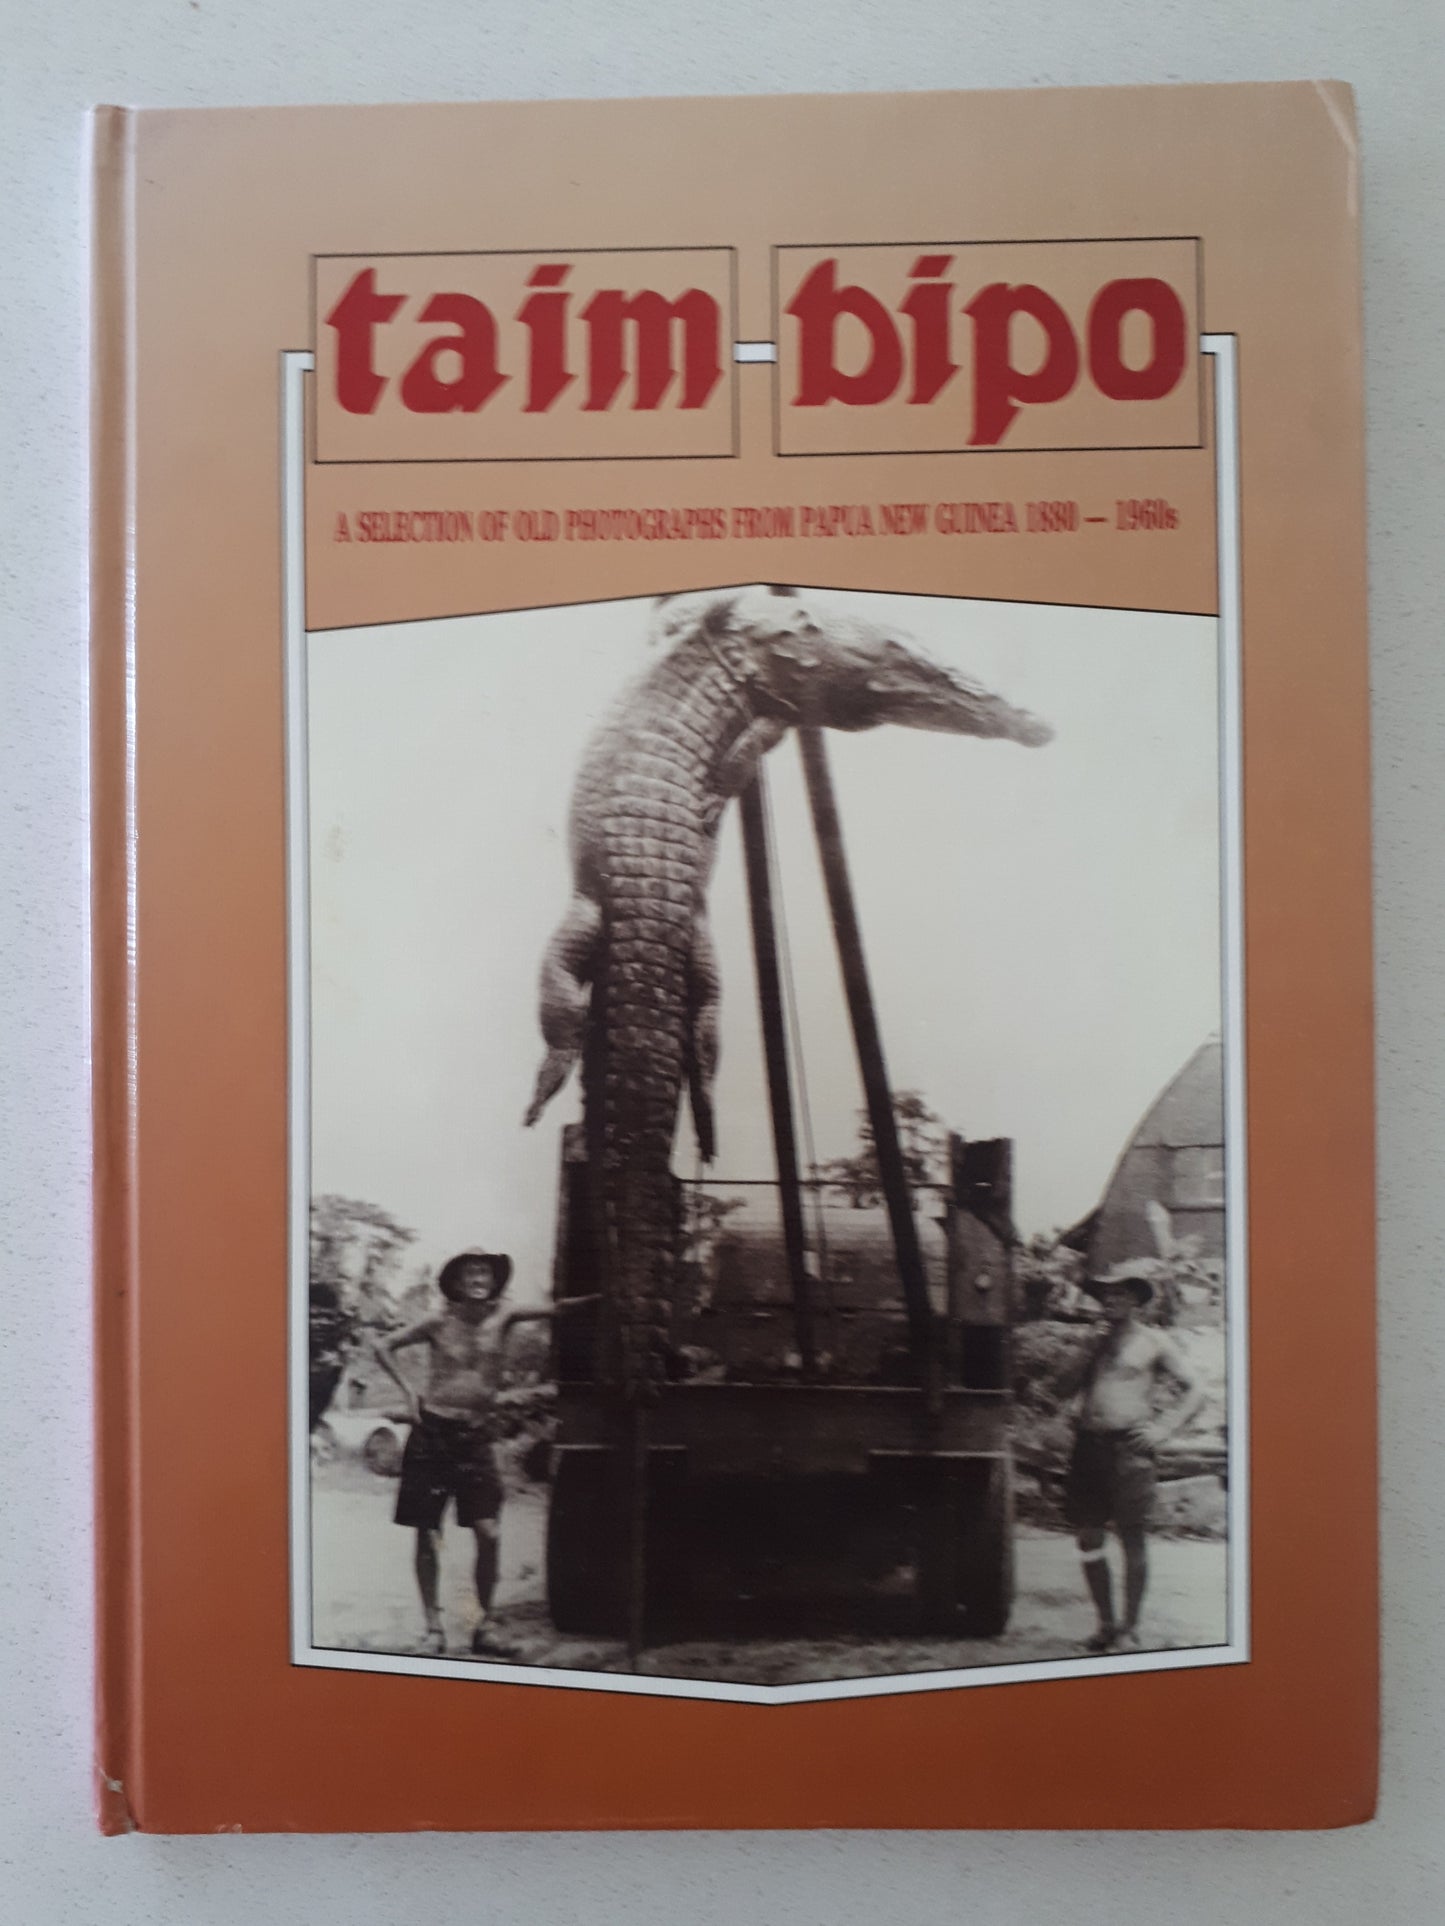 TAIM BIPO by Michael Coutts